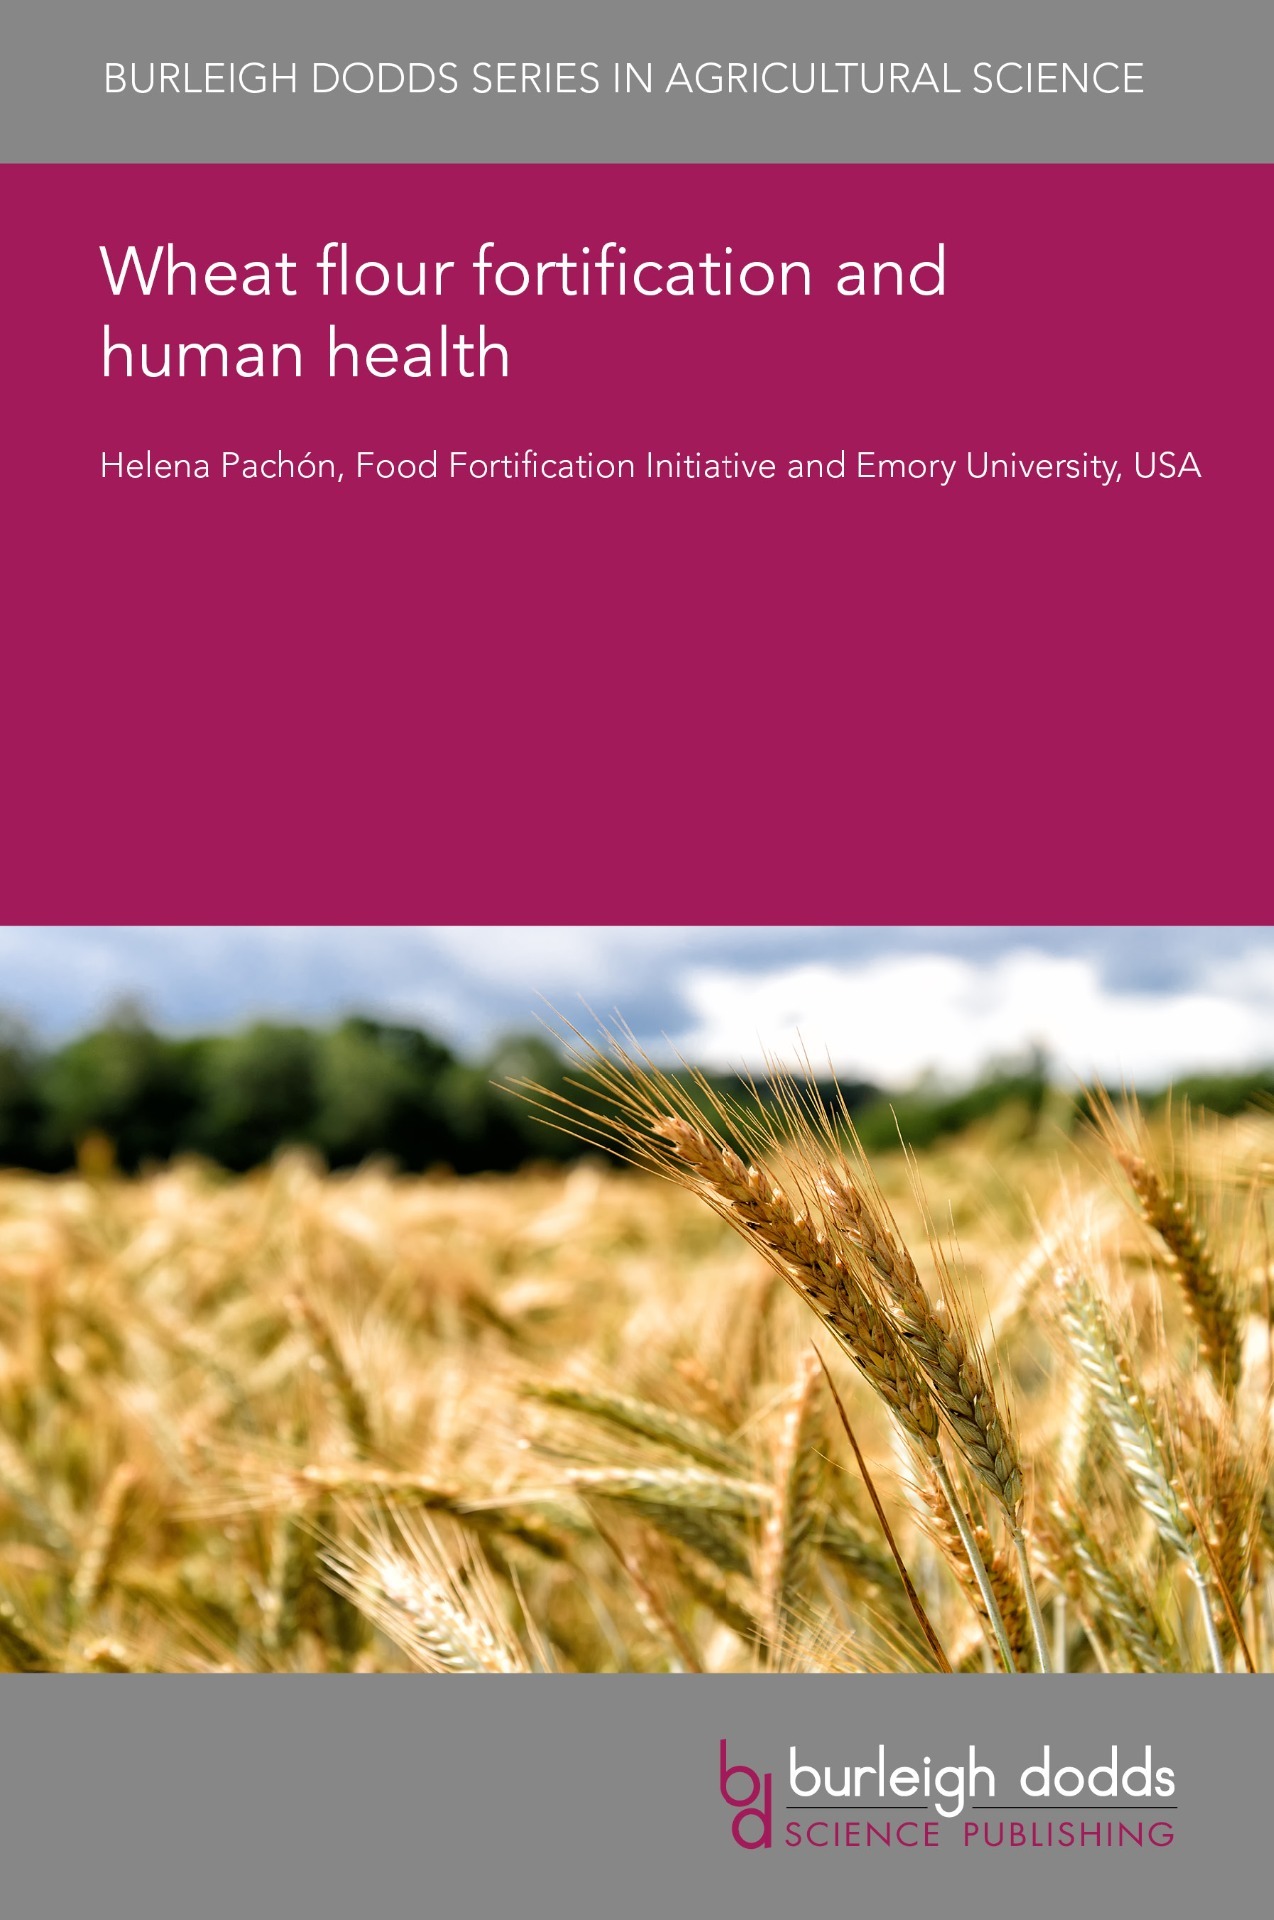 Wheat flour fortification and human health